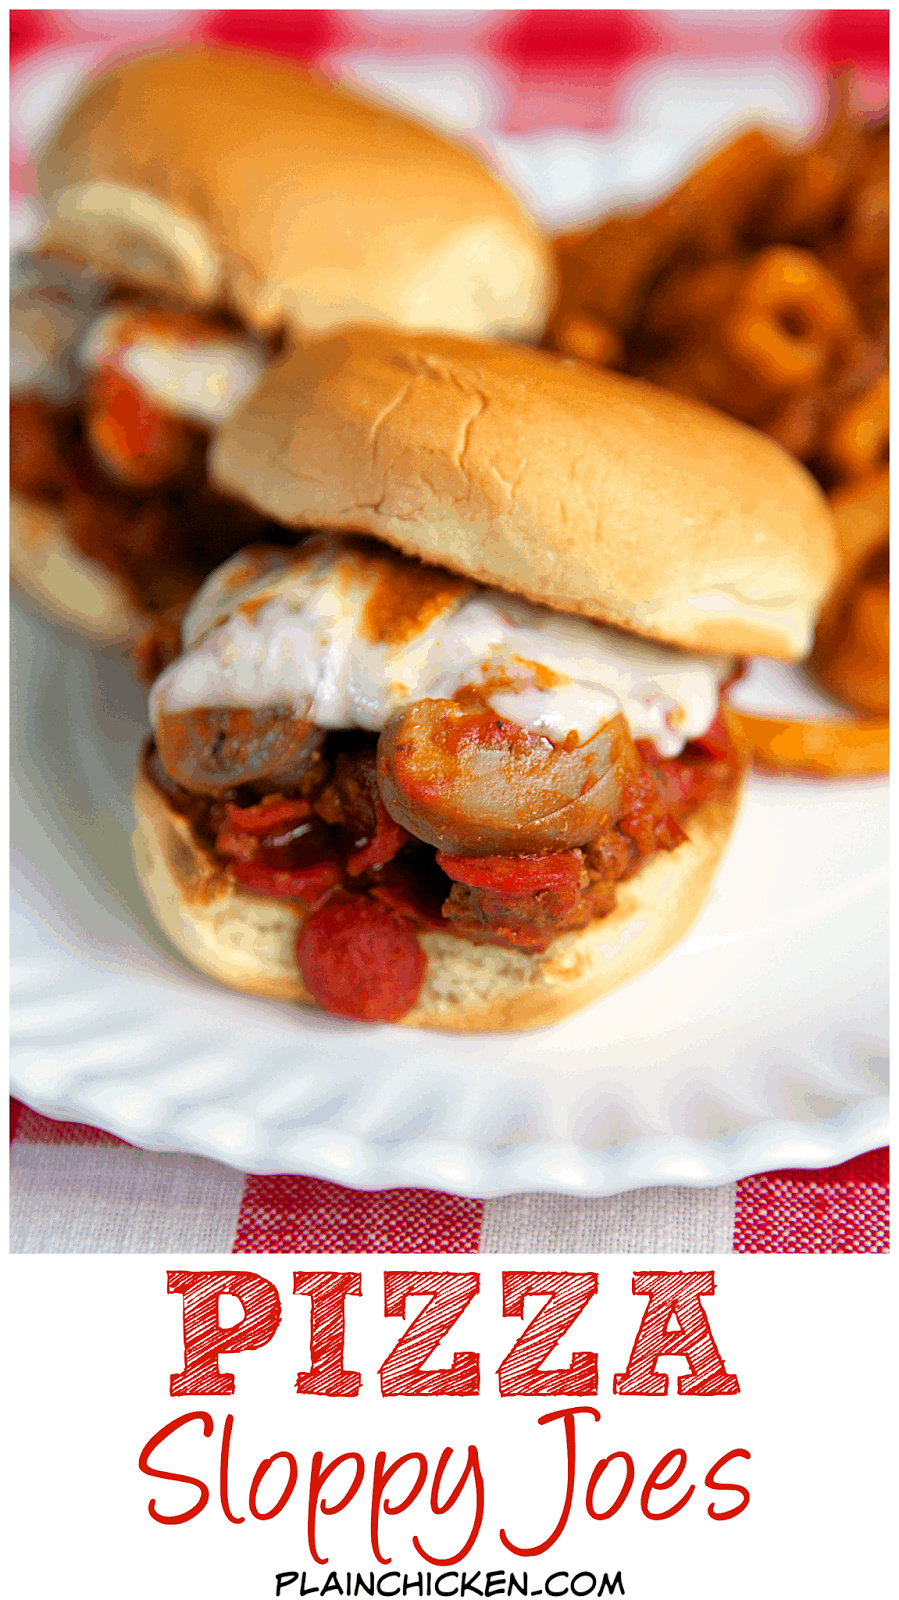 Pizza Sloppy Joes Recipe - hamburger or sausage, pepperoni, mushrooms, pizza sauce - top with mozzarella cheese. Our new favorite way to eat sloppy joes! Ready to eat in about 15 minutes!